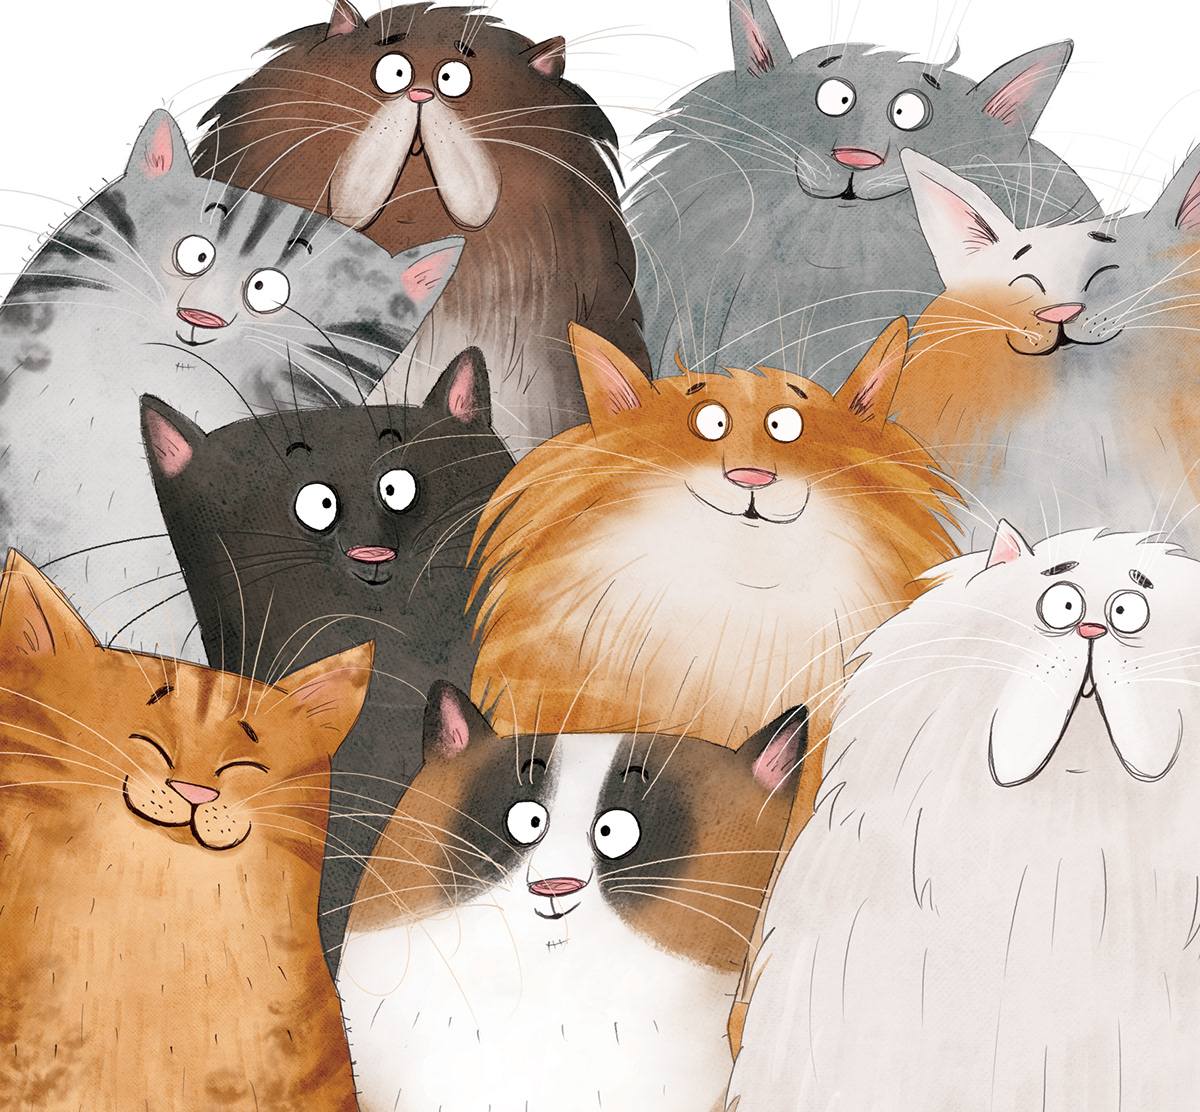 Cat children's book funny cats kidlit children illustration cats personalized comic humorous cat breeds